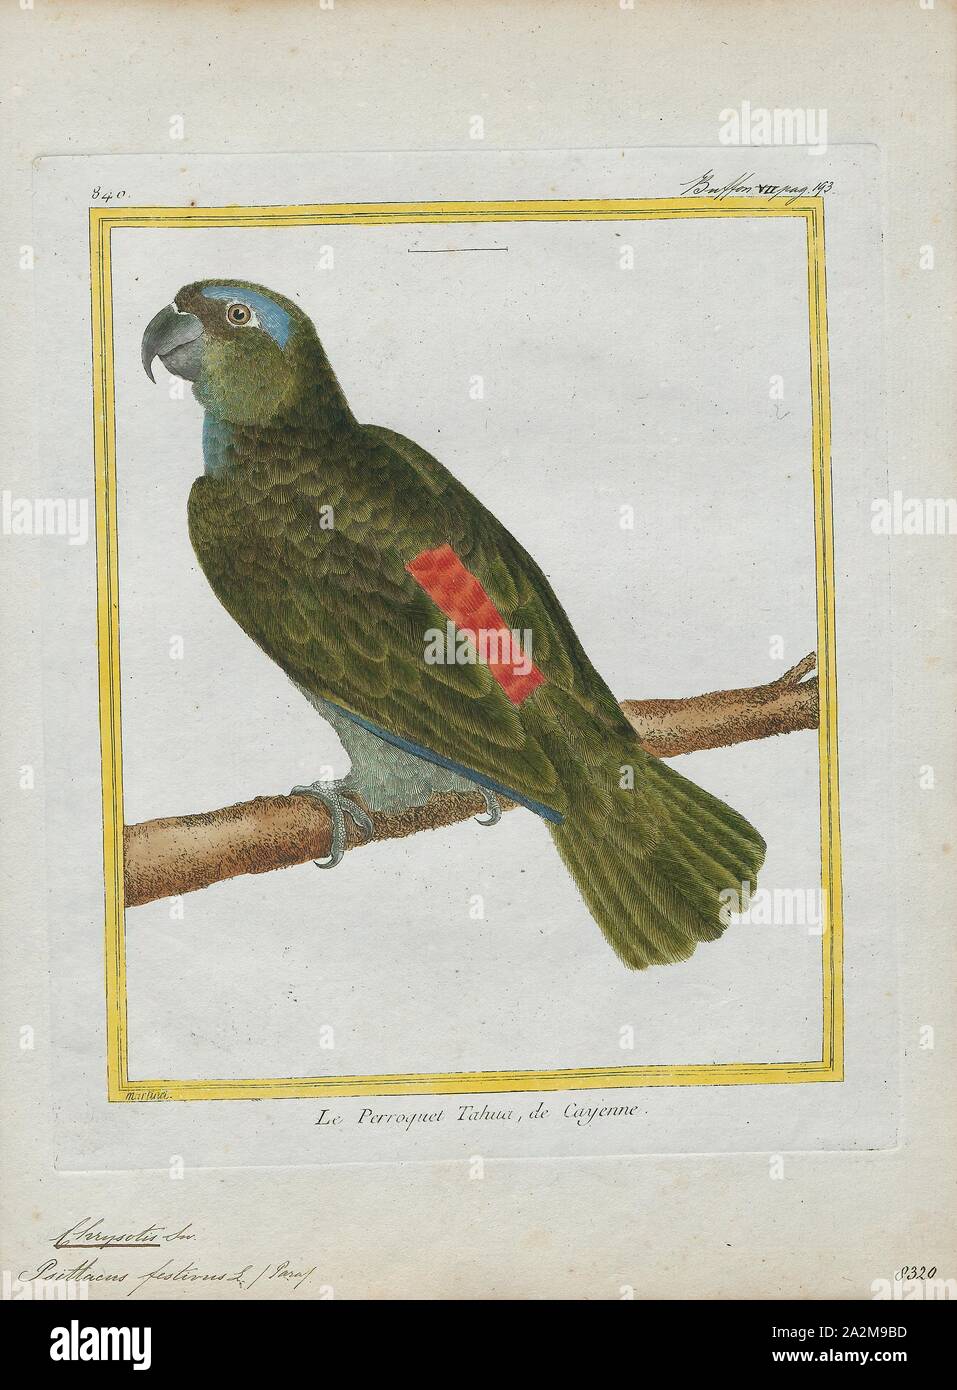 Chrysotis festiva, Print, Amazon parrot, Amazon parrot is the common name for a parrot of the genus Amazona. These are medium-sized parrots native to the New World ranging from South America to Mexico and the Caribbean., 1700-1880 Stock Photo